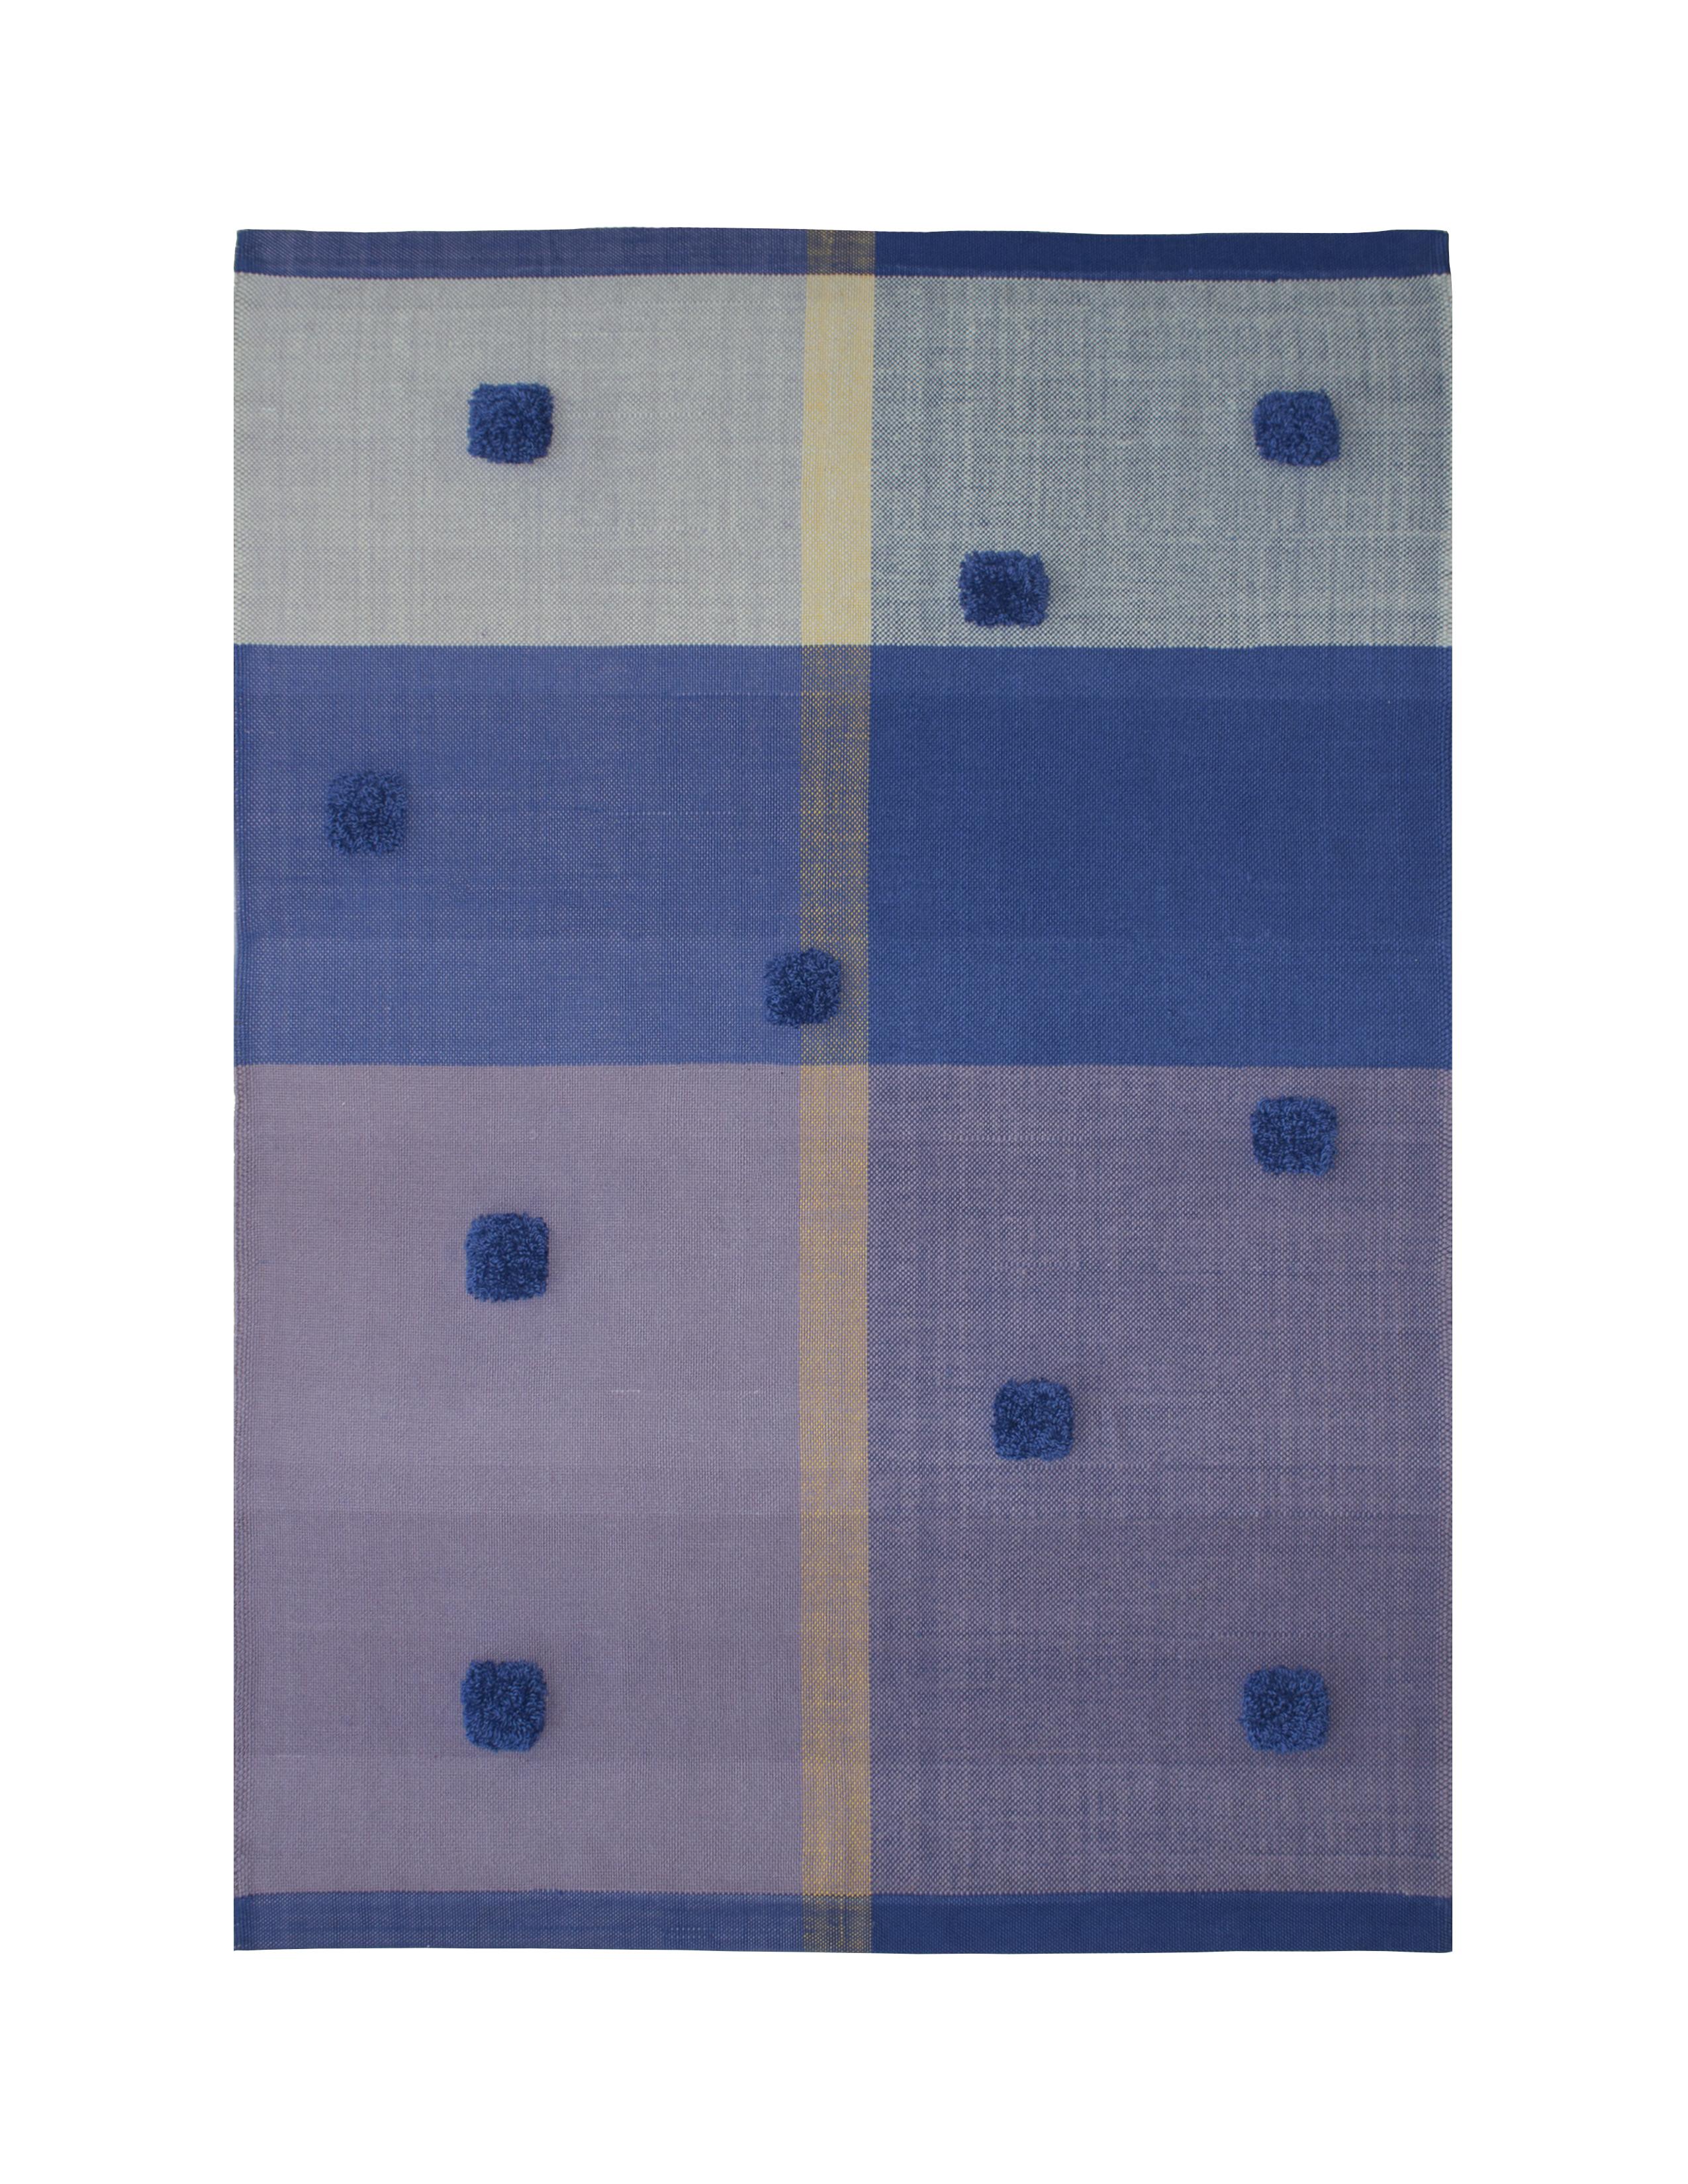 Alegoría A01 by Bi Yuu
Dimensions: D 200 x 300 H cm
Material: Merino wool/ cotton
Also available in different dimensions.

She founded Bi Yuu with the vision that the work would be conceived via
collaborative processes with specific artisan